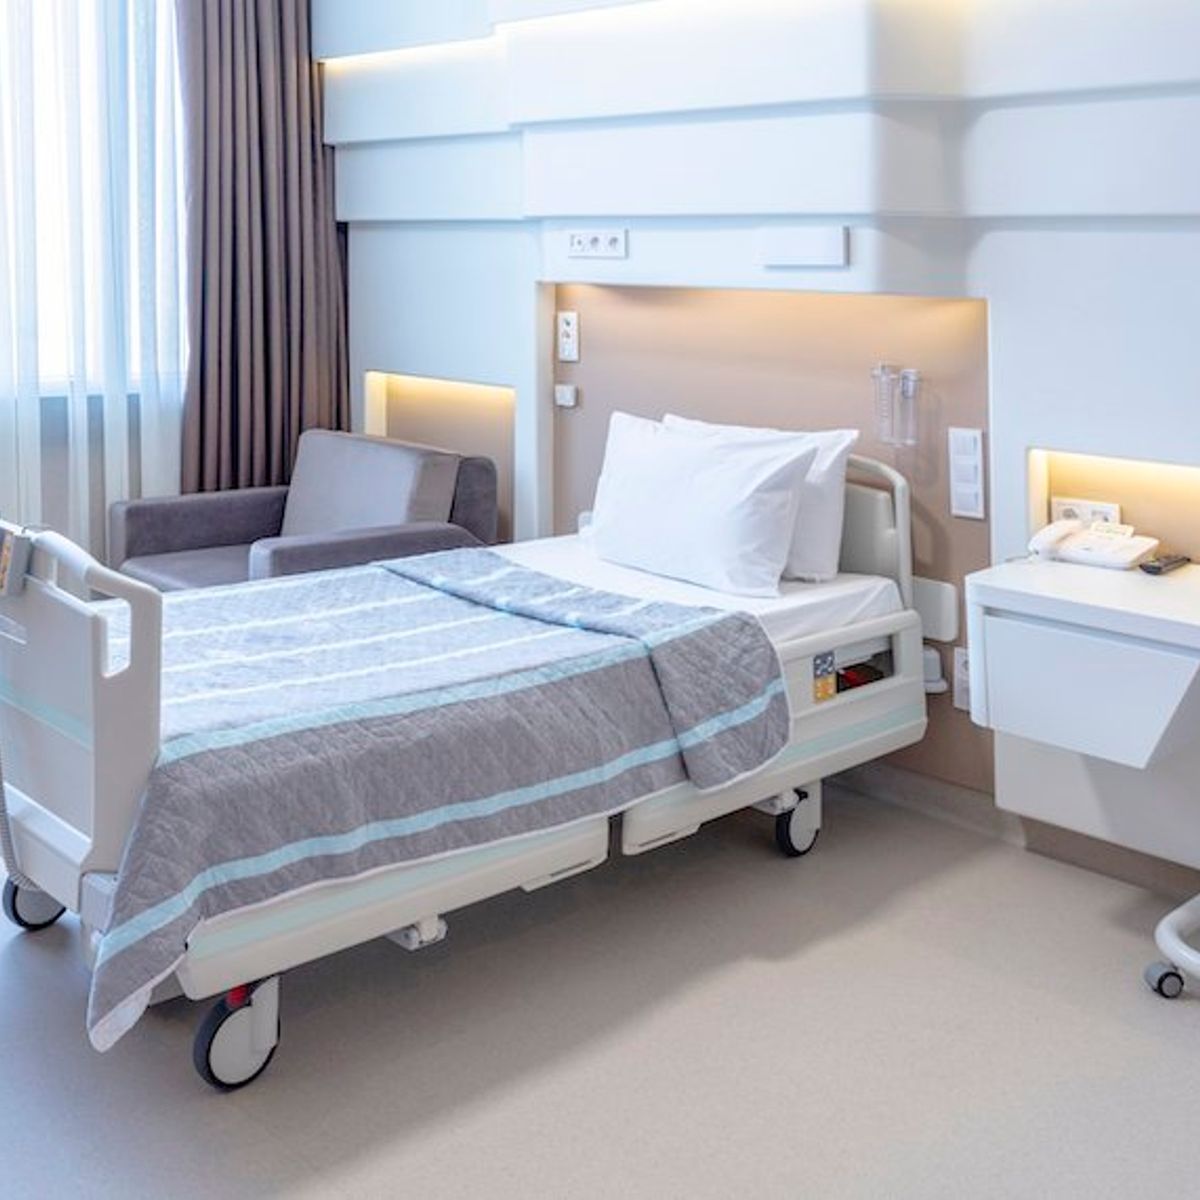 Maidesite Quality Medical Beds for Sale